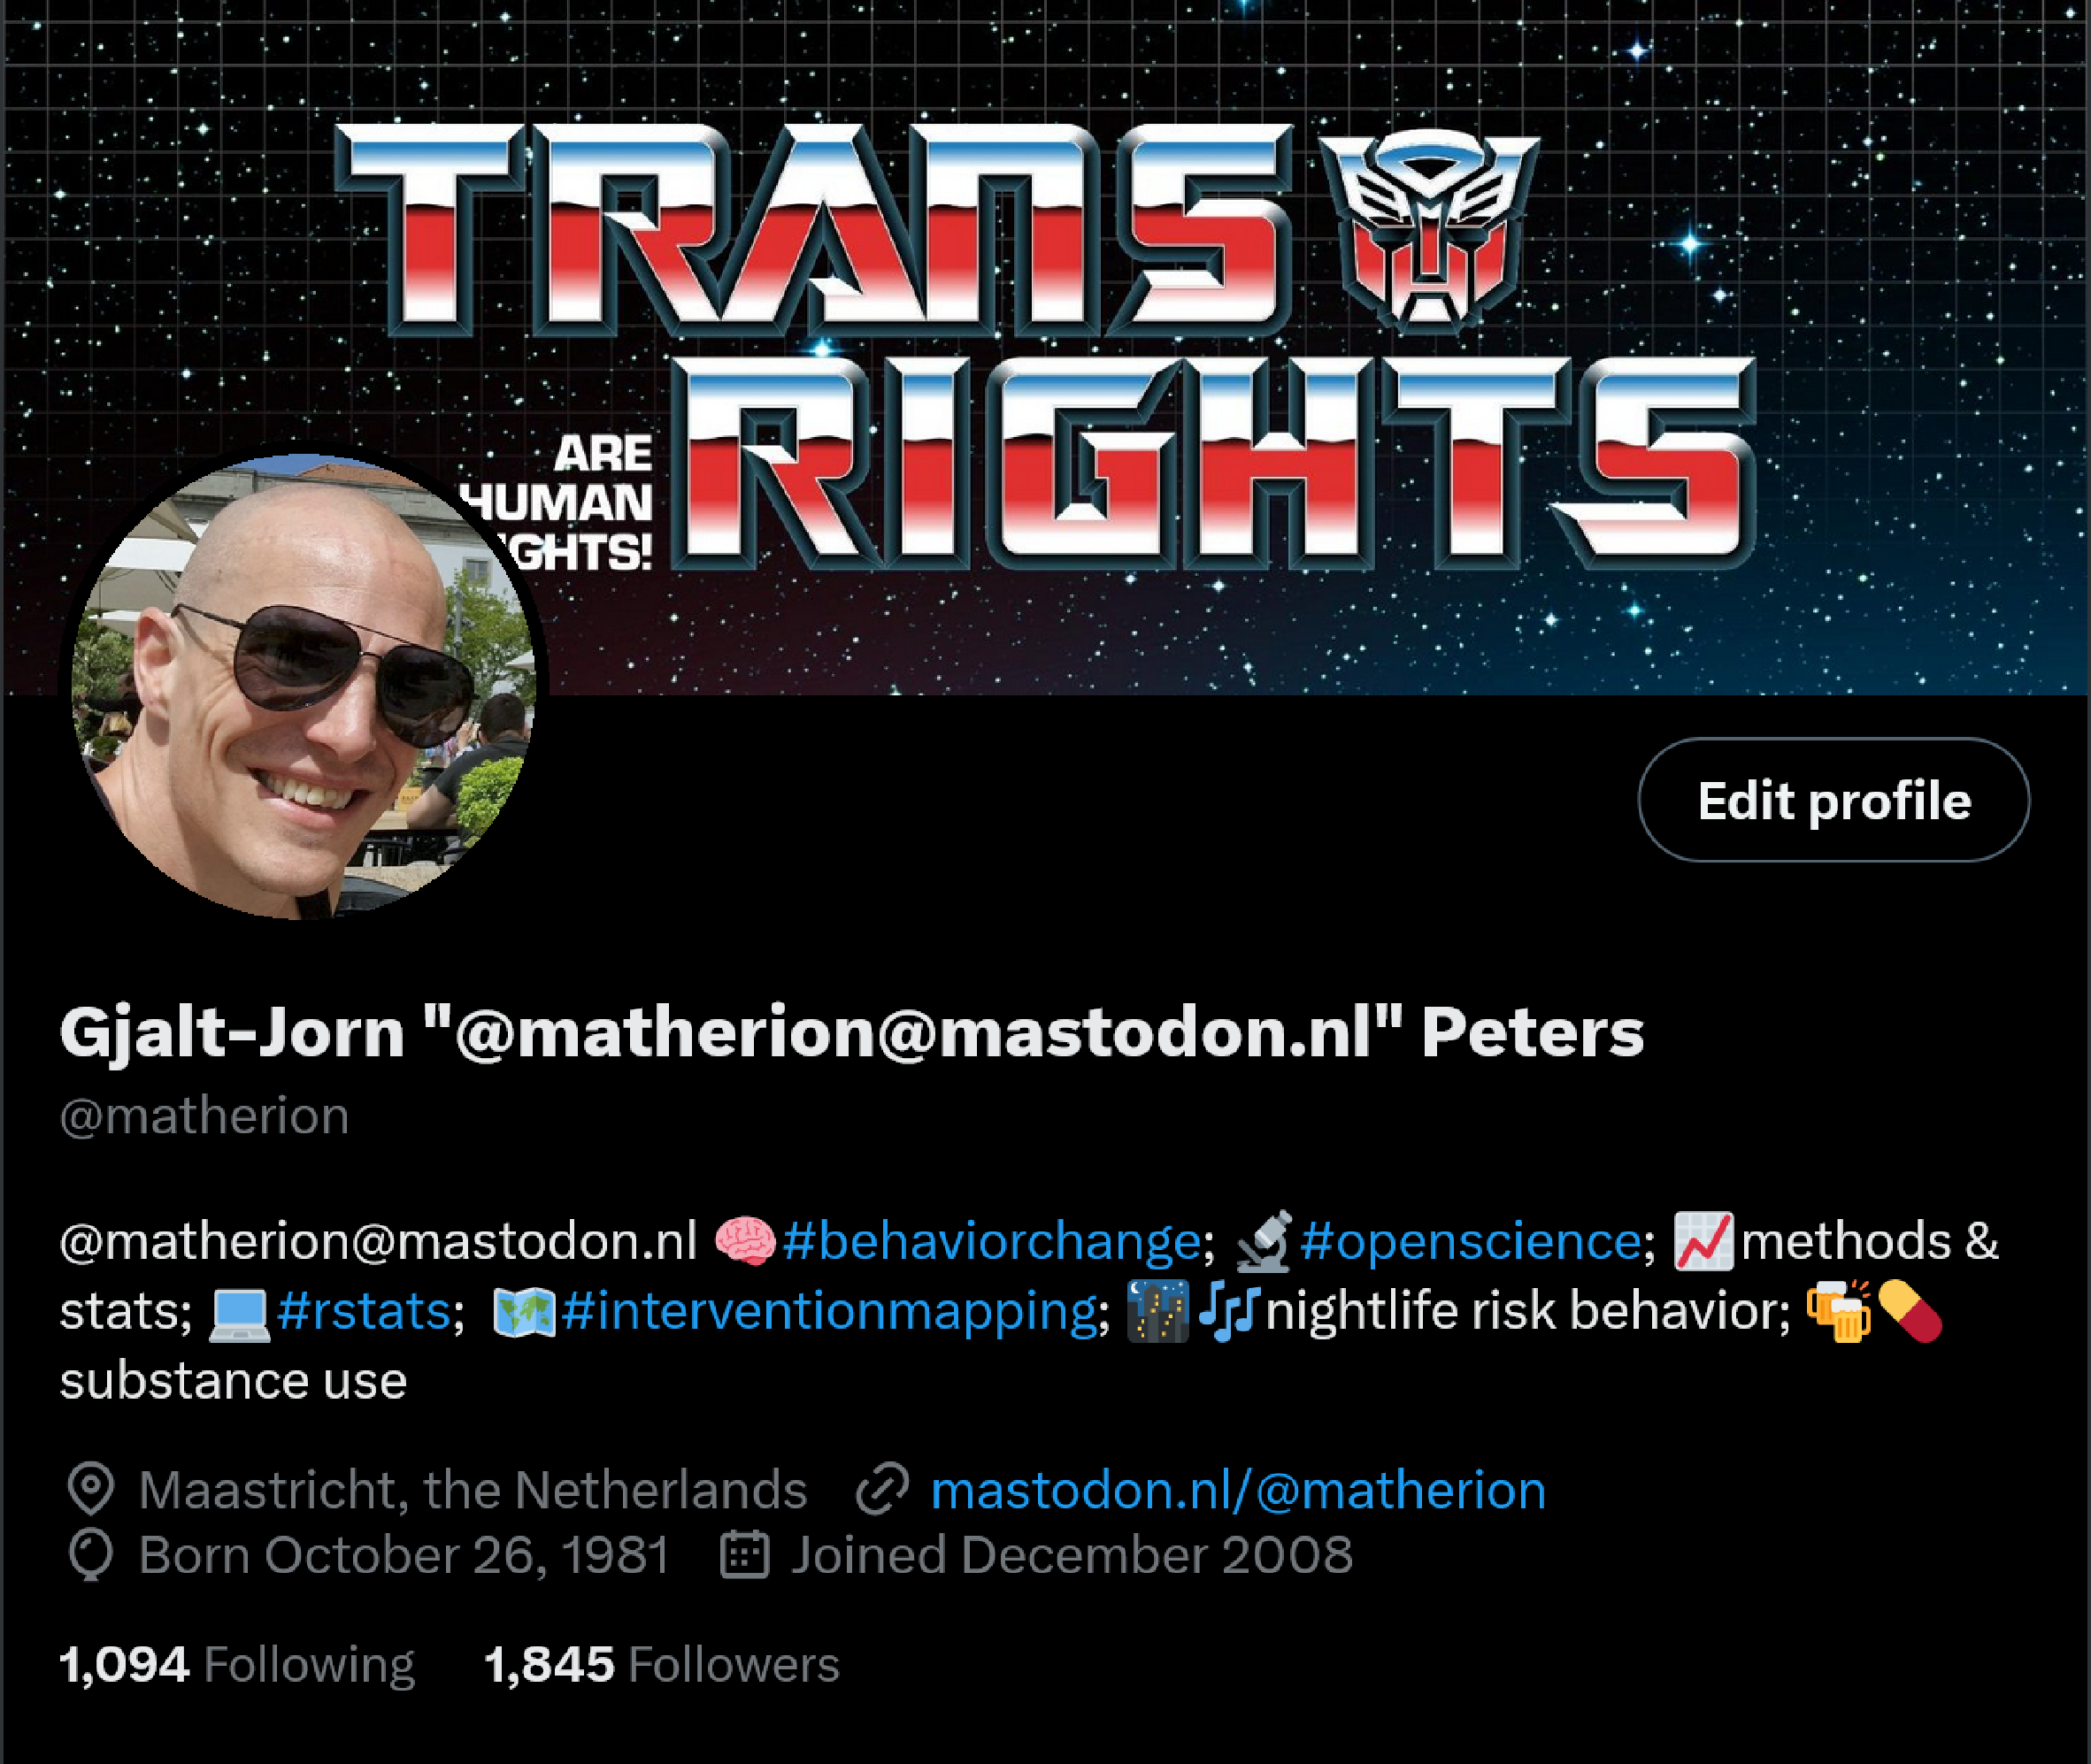 A screenshot of my old Twitter profile, with a cool banner saying 'Trans rights are human rights' by Kathryn Gibes.